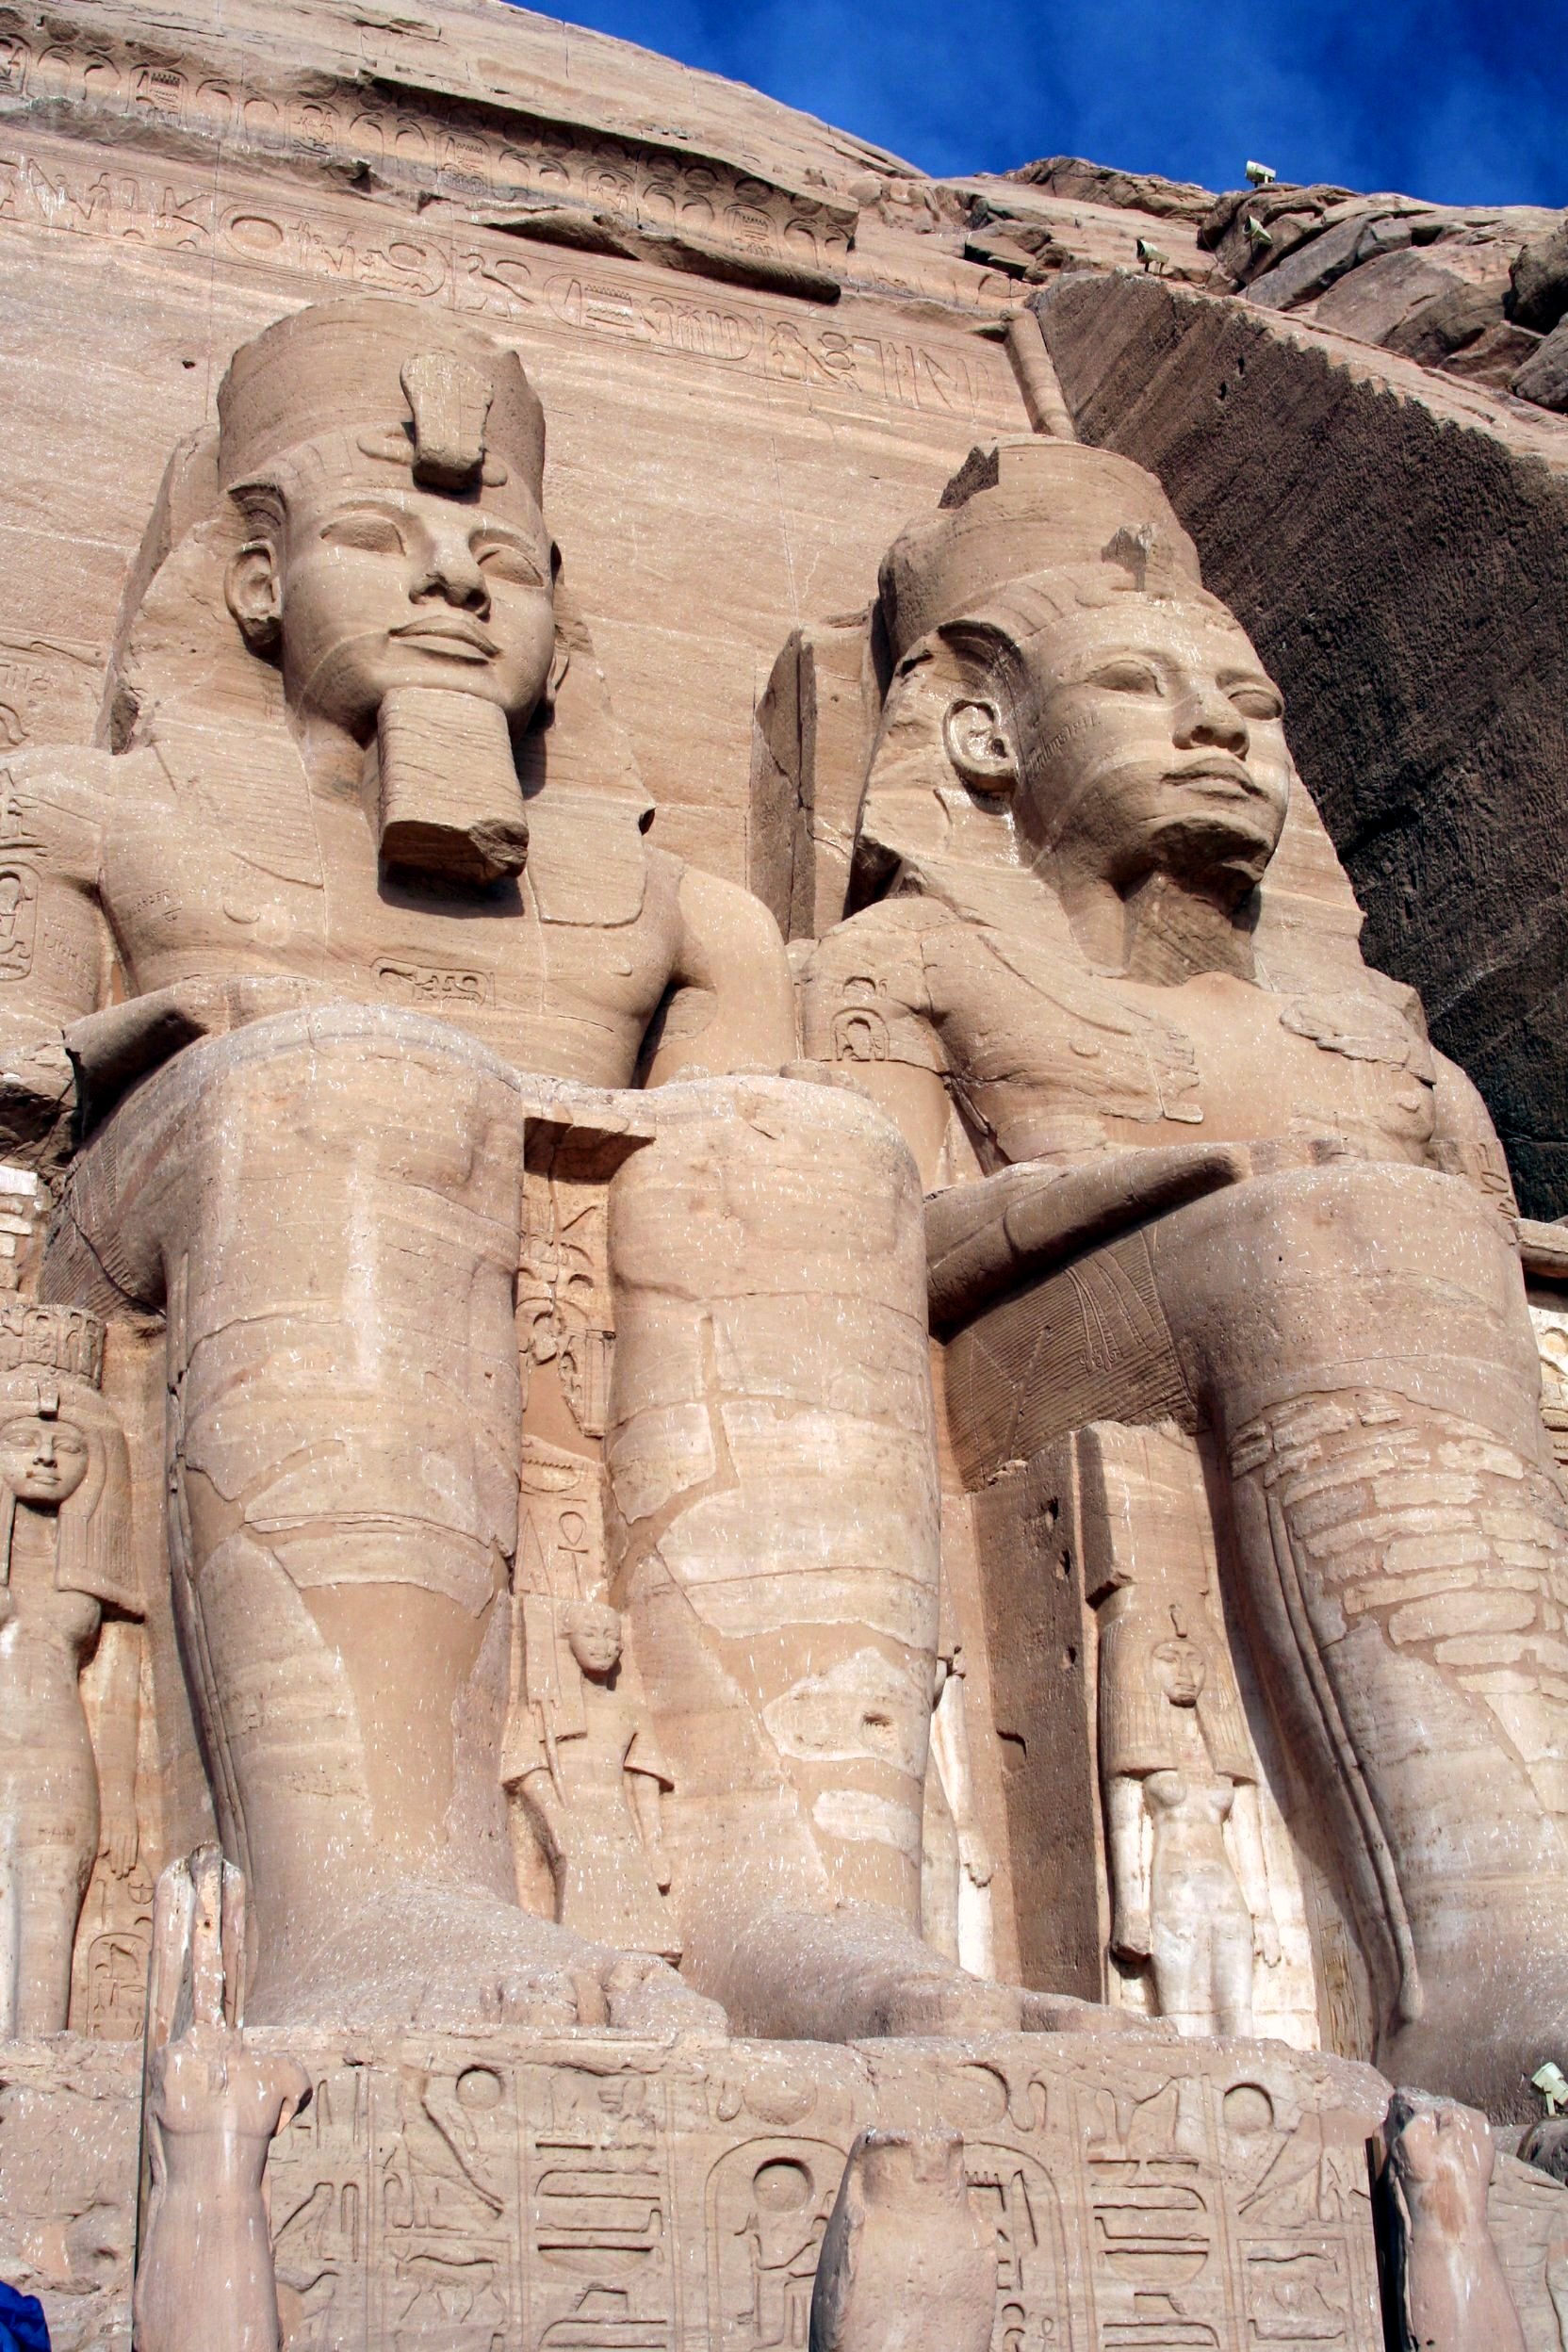 Abu Simbel in the heart of Nubia, the Temple of Rameses II.